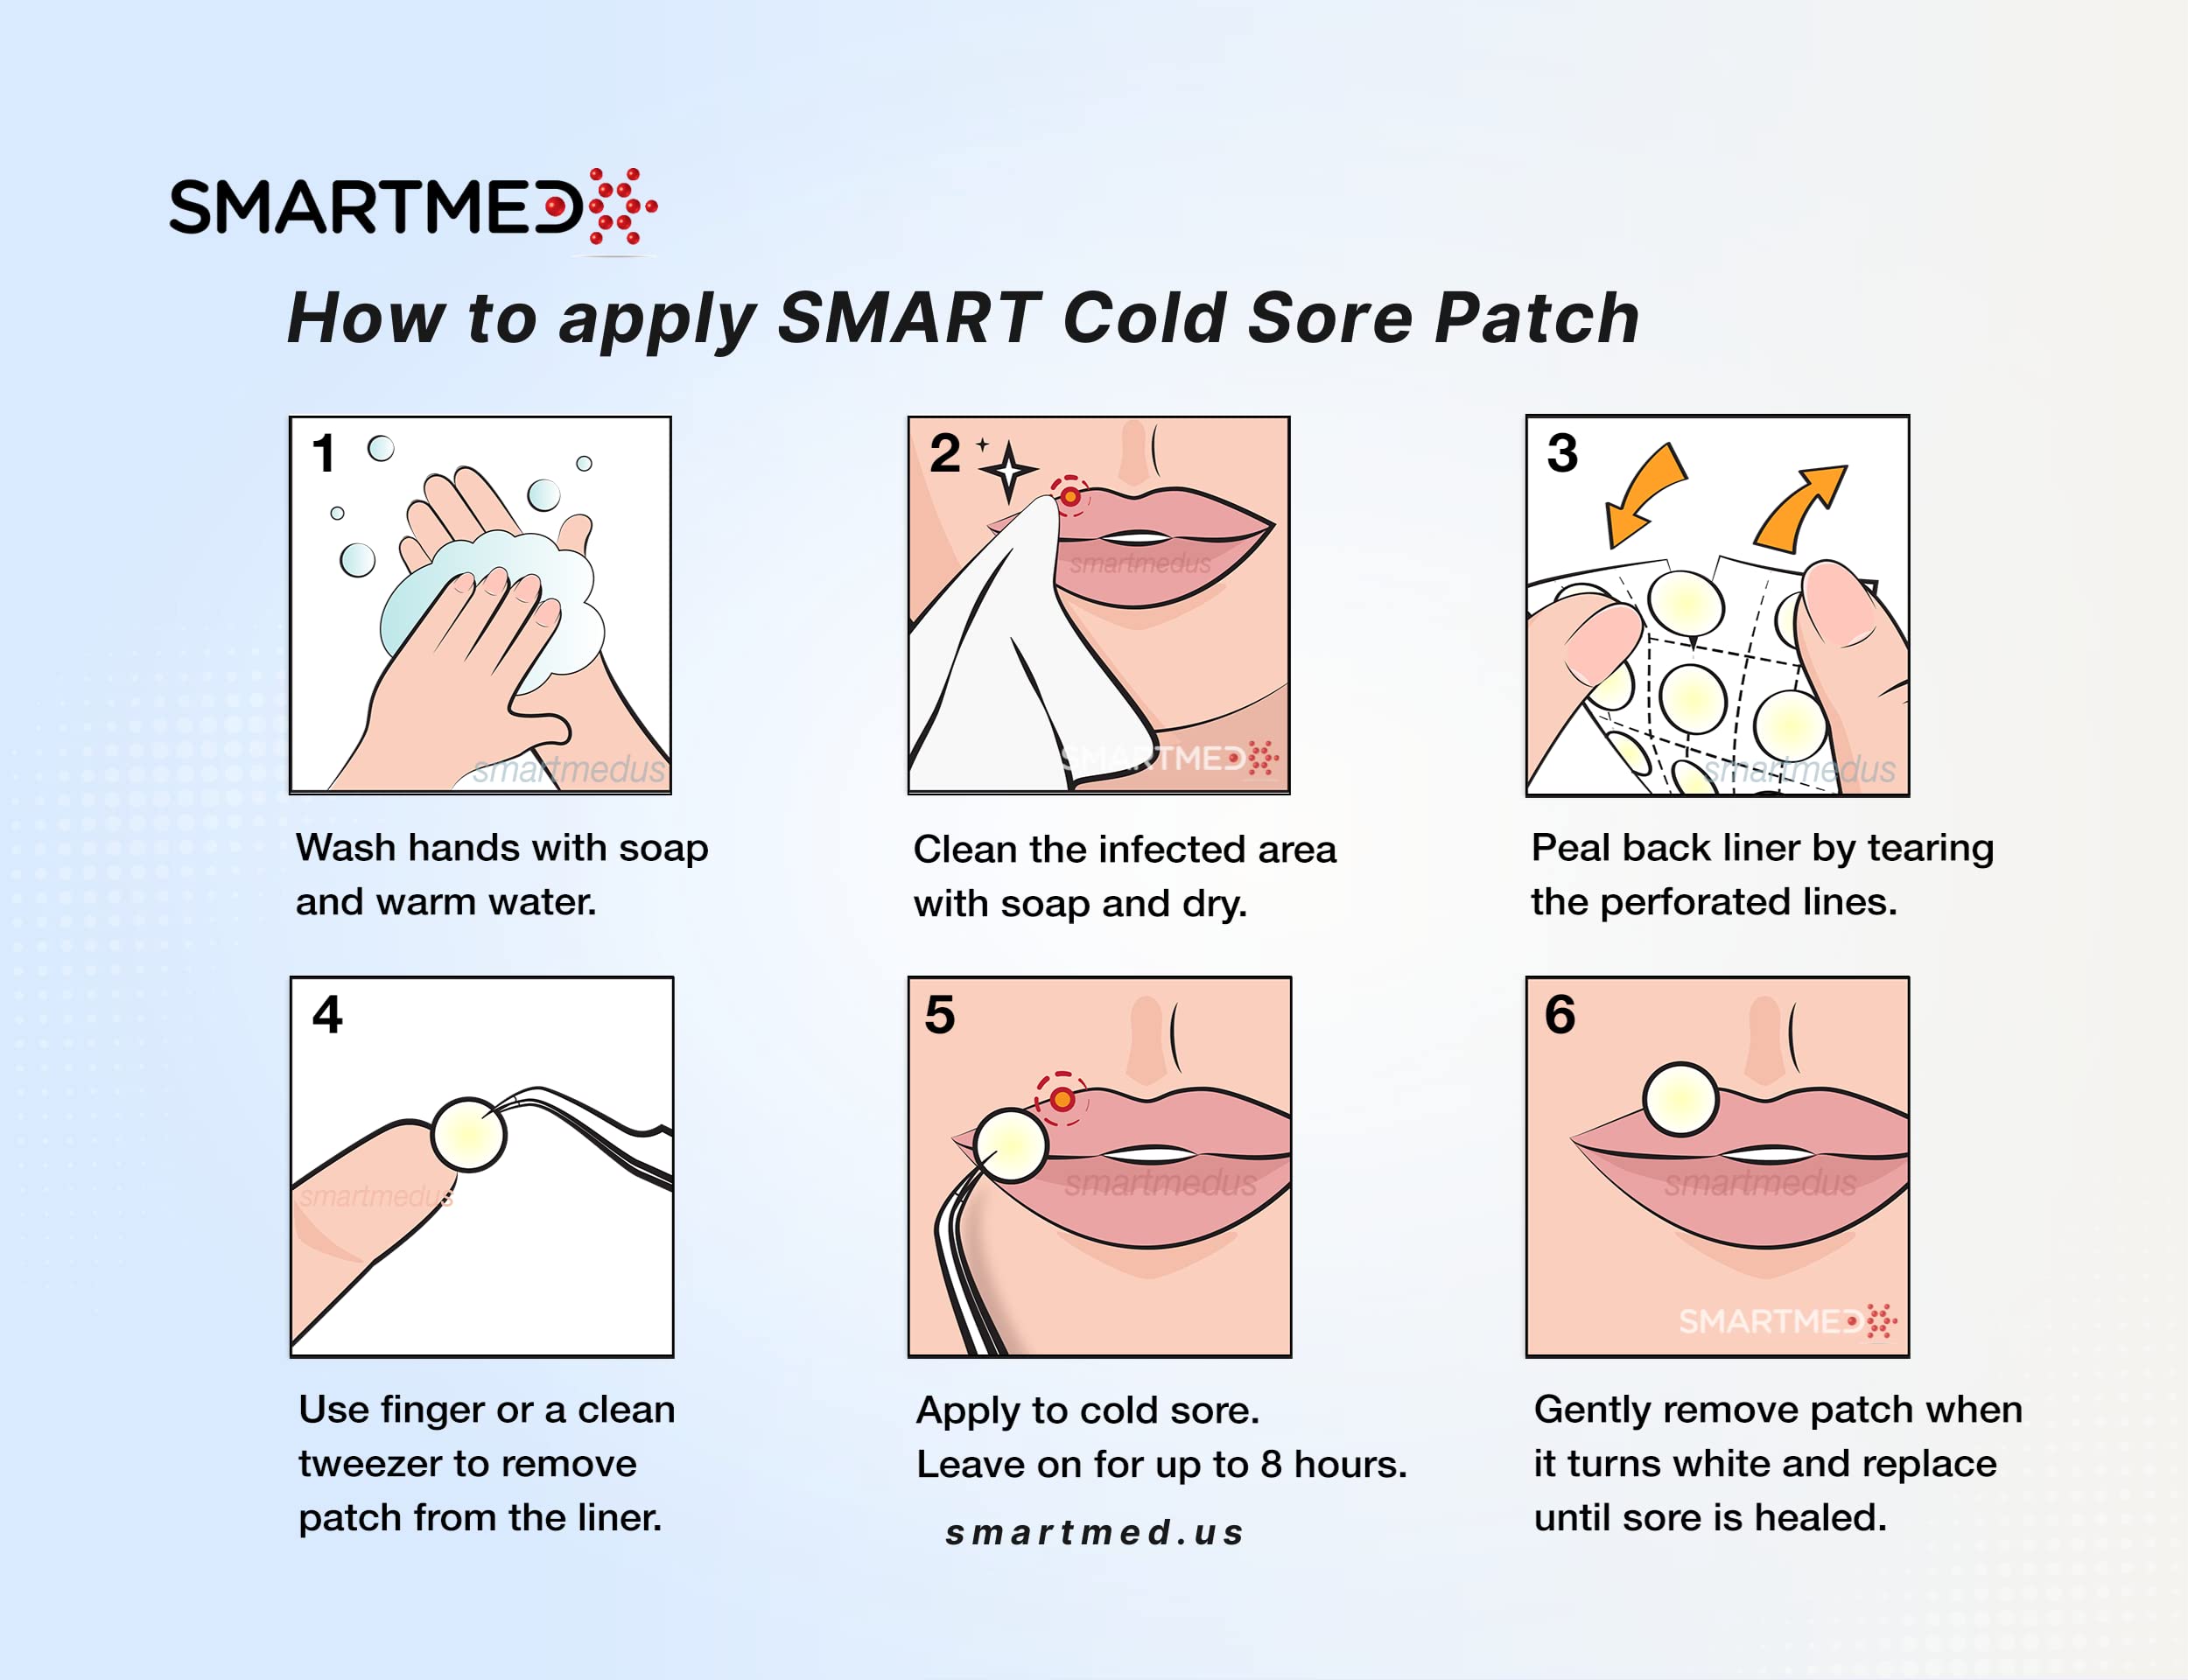 SMARTMED Smart Cold Sore Treatment Patch Help Prevent Breakouts, Soothe Itching and Burning | Discrete, Invisible, Skin Safe Adhesive [24 Patches]